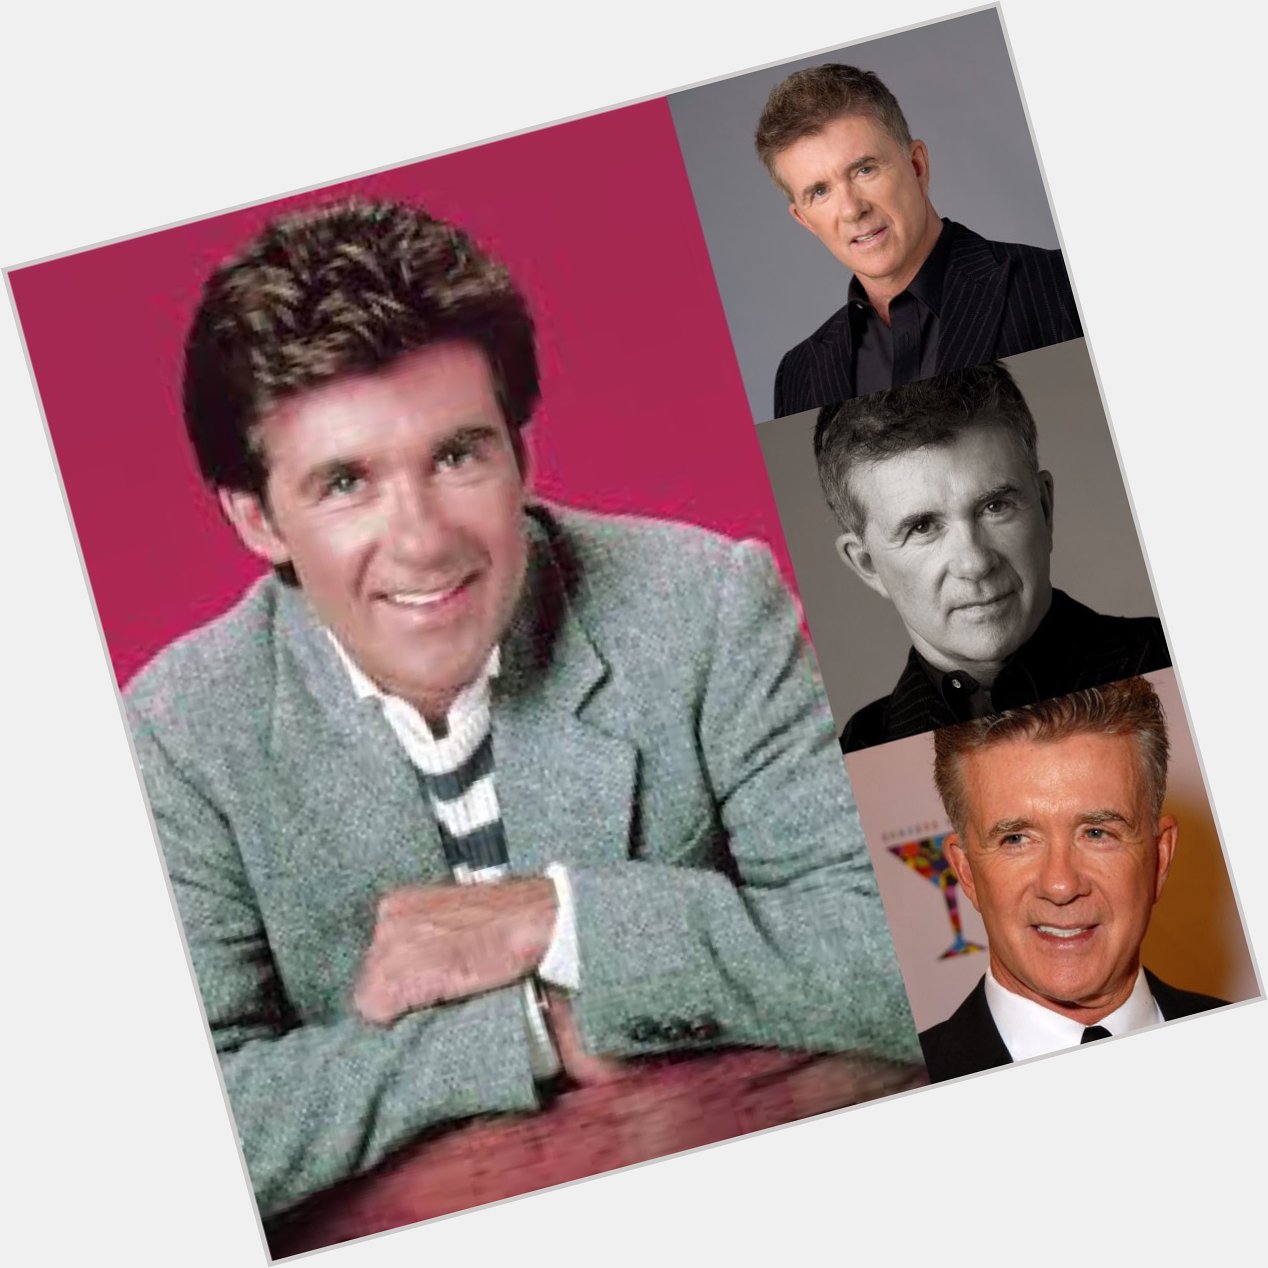 Happy 71 birthday to Alan Thicke up in heaven. May he Rest In Peace.  